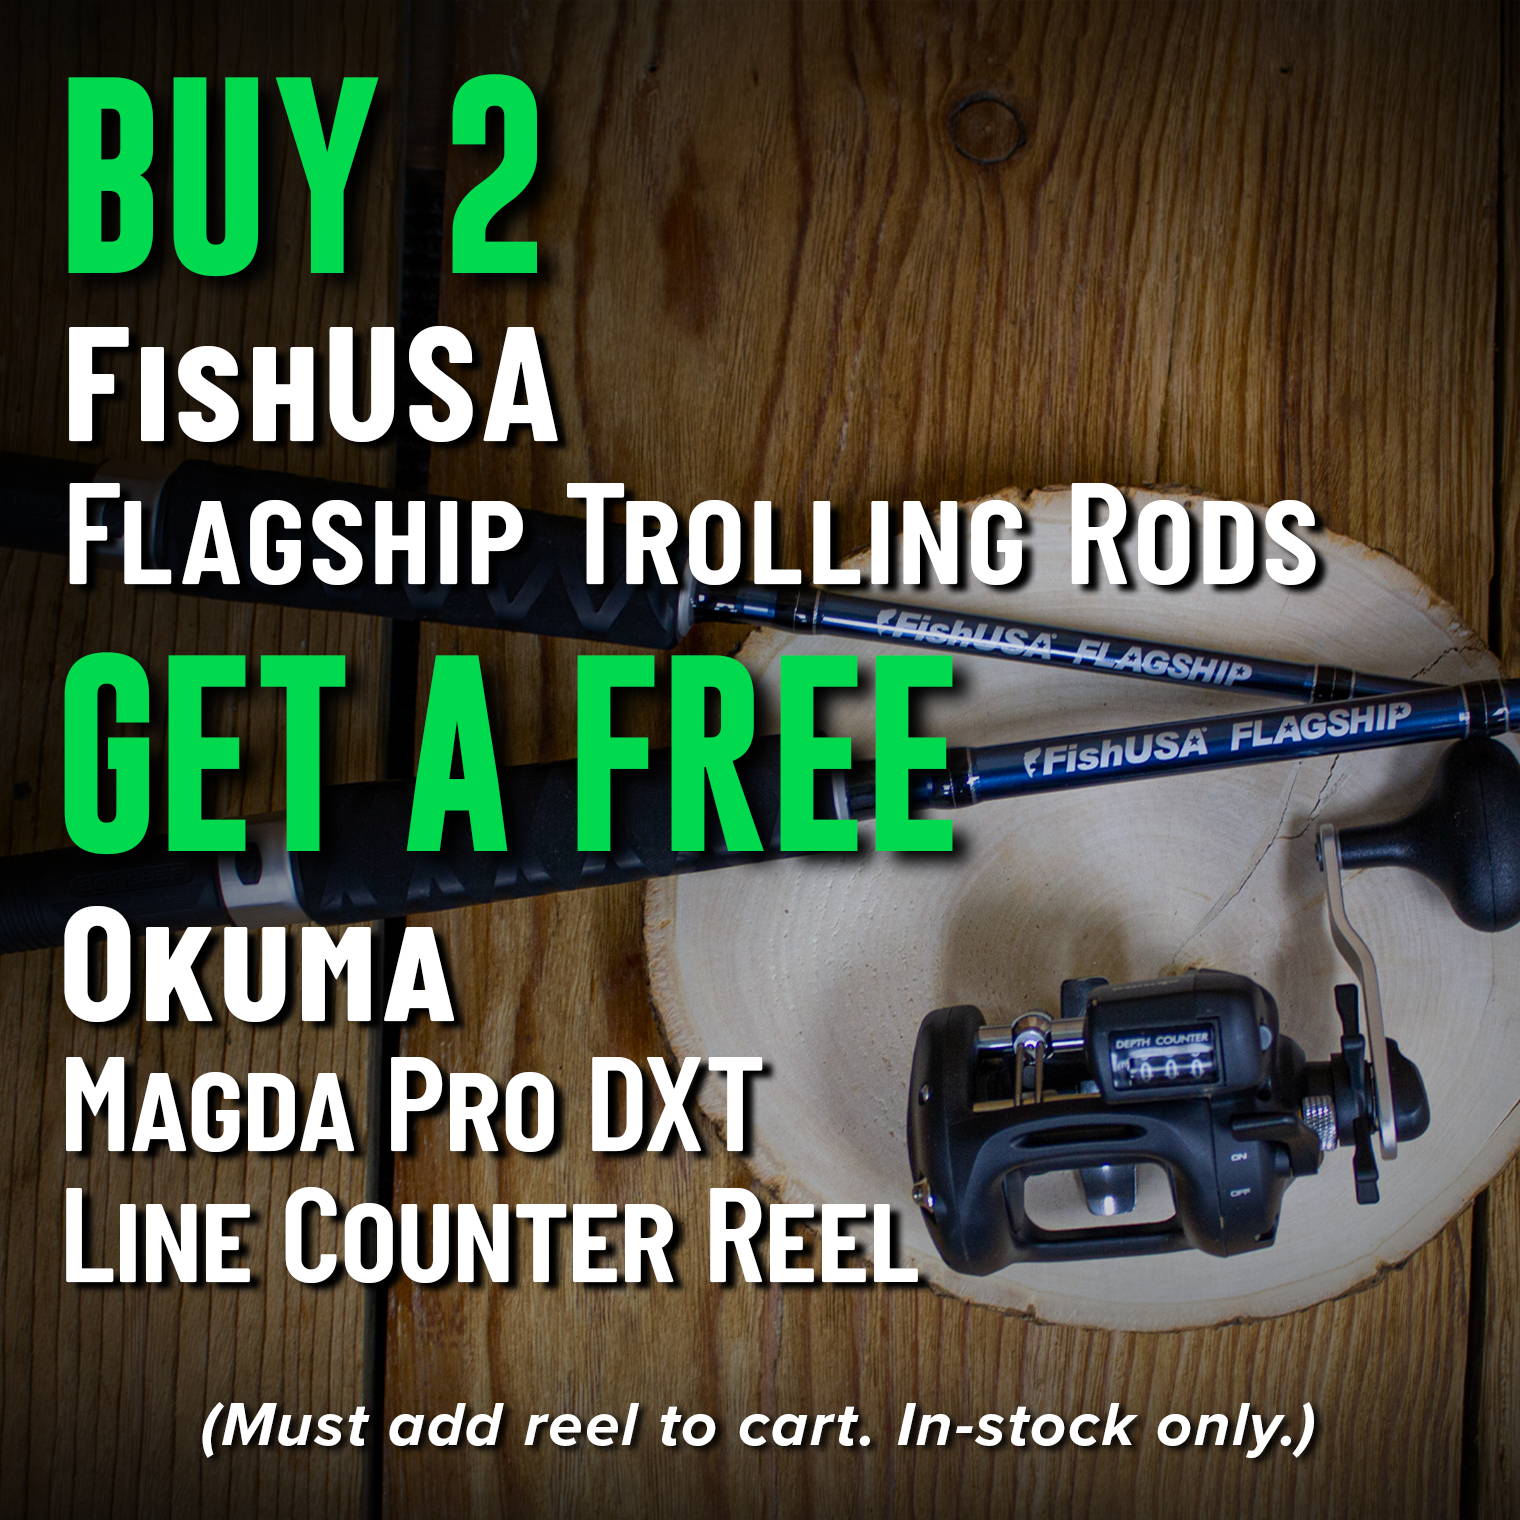 Buy 2 FishUSA Flagship Trolling Rods Get a Free Okuma Magda Pro DXT Line Counter Reel (Must add reel to cart. In-Stock only.)